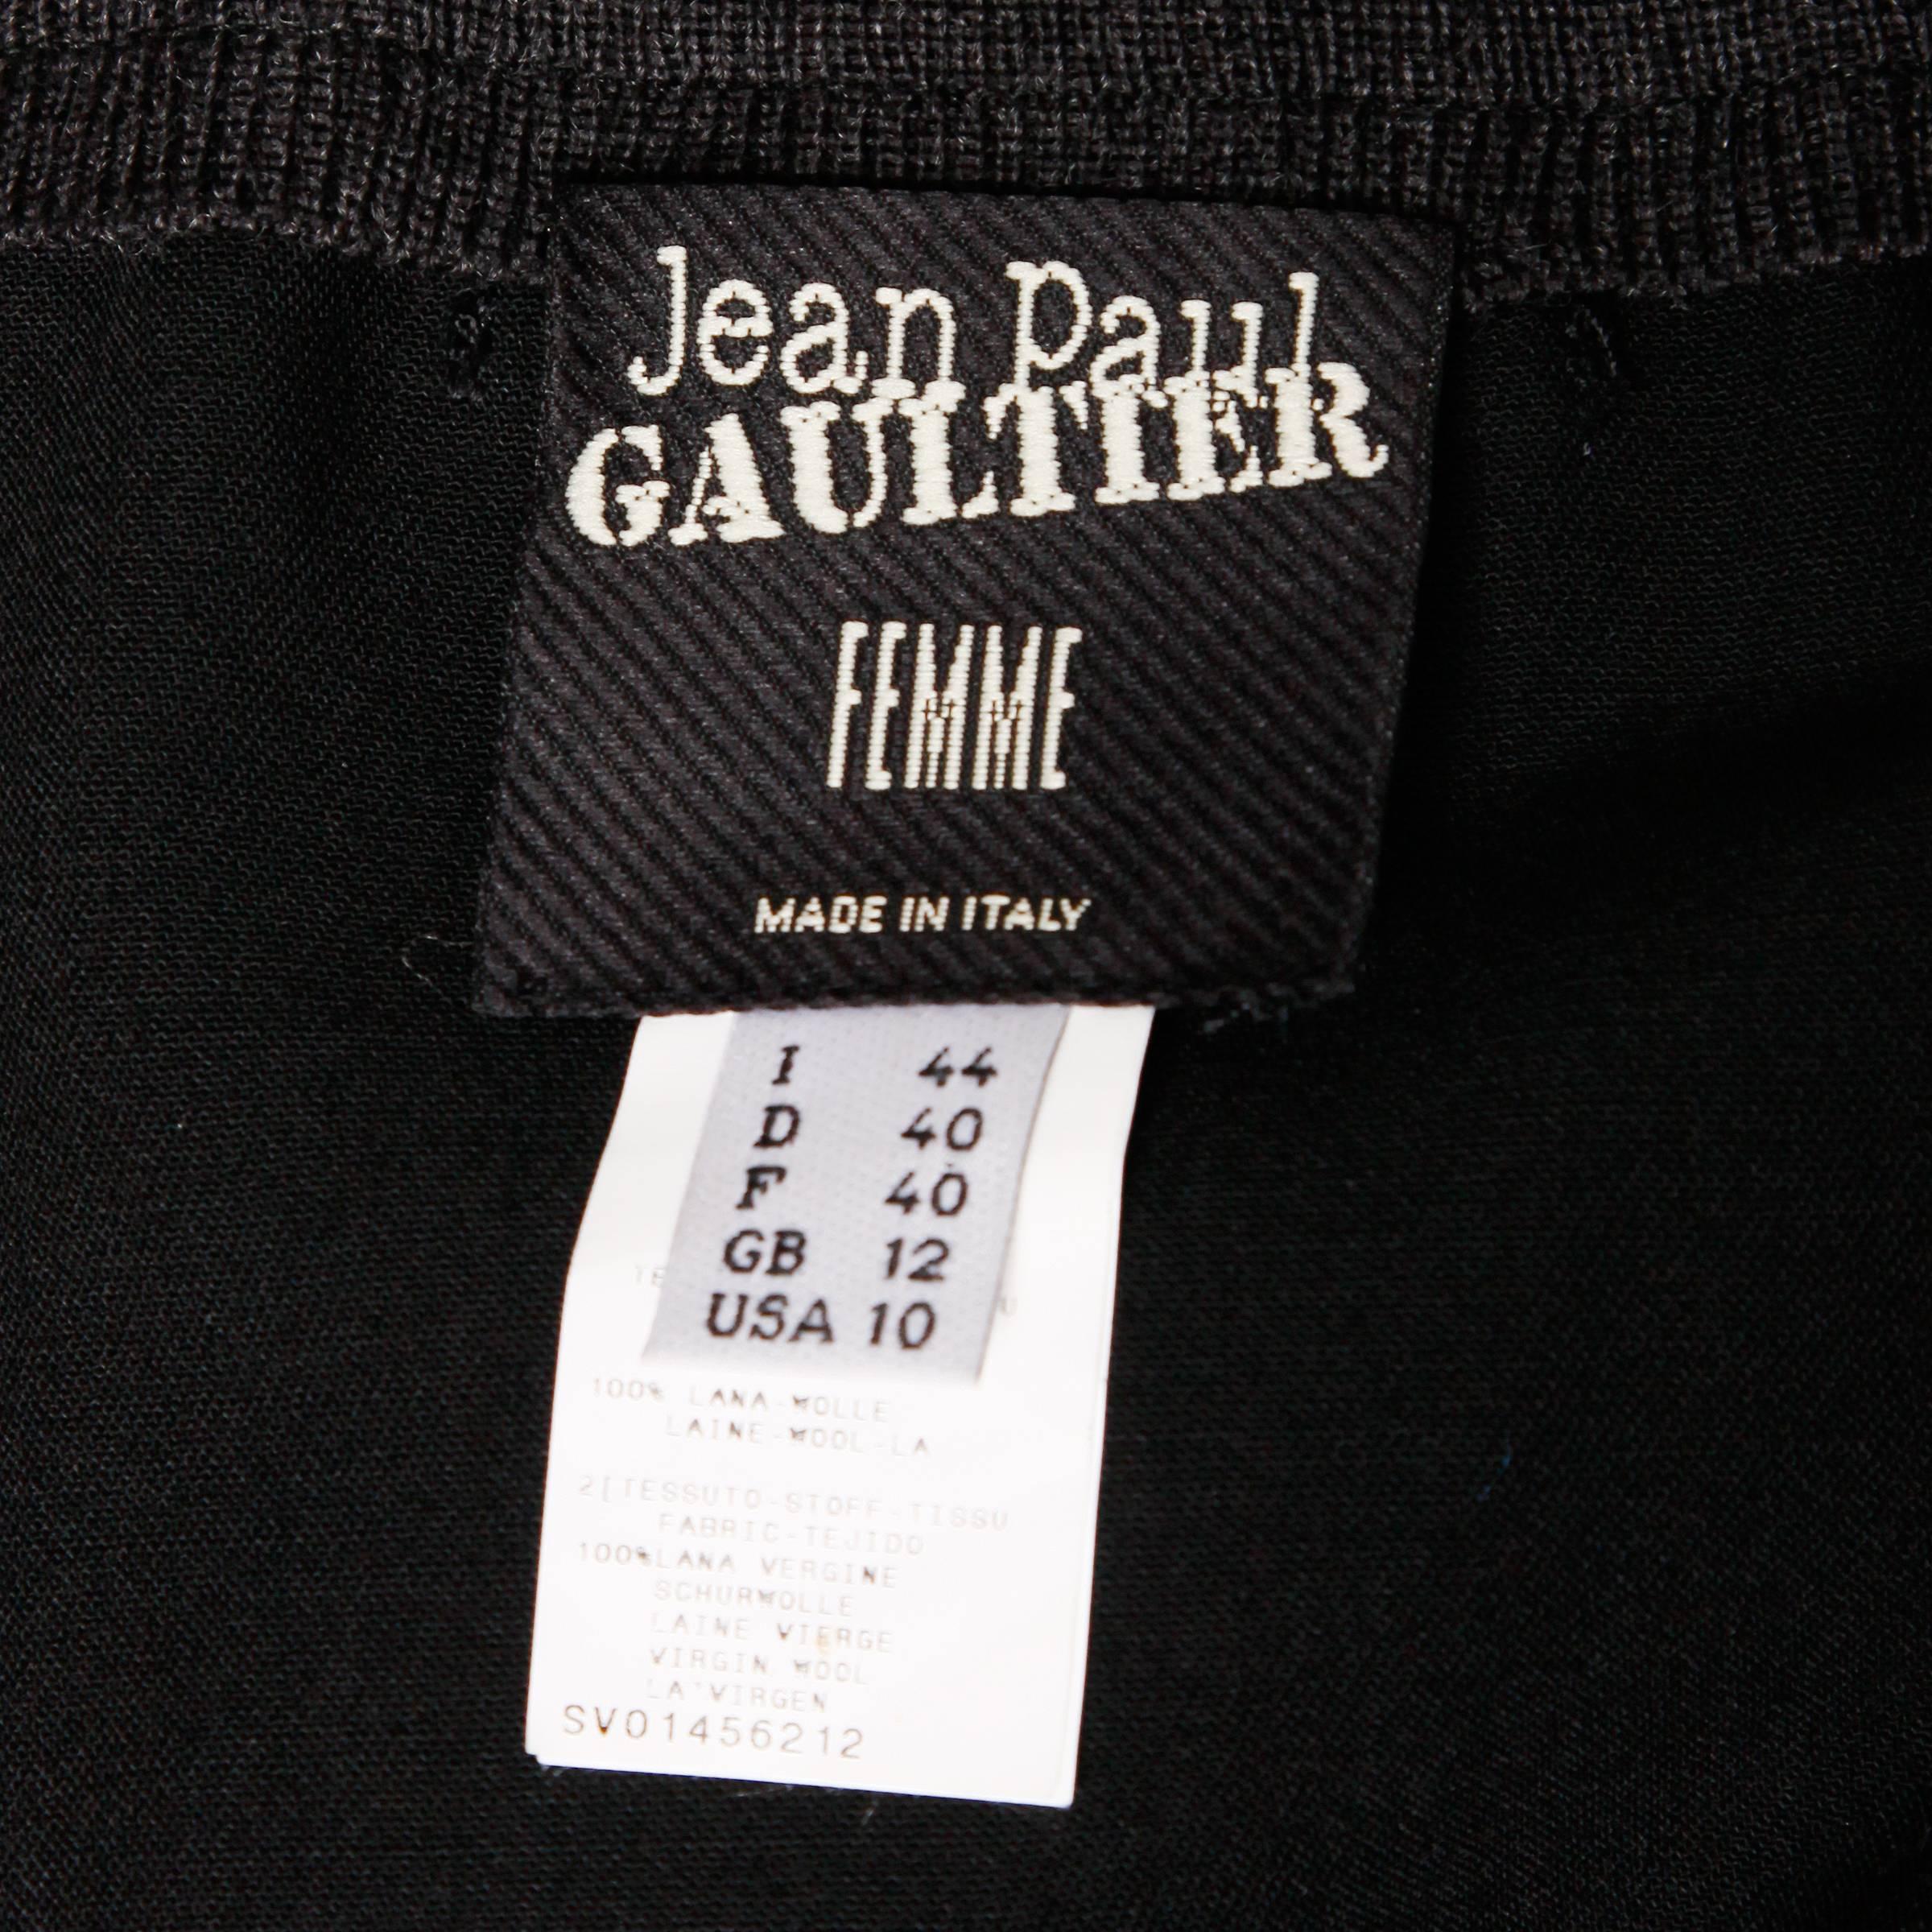 Black wool avant garde skirt by Jean Paul Gaultier. Gray wool trim and two way front zipper. Unique cut with a high low hemline. Made in Italy. Unlined. 100% wool. The marked size is a US 10 / GB 12 / I 44 / D 40 / F 40 and the skirt fits true to